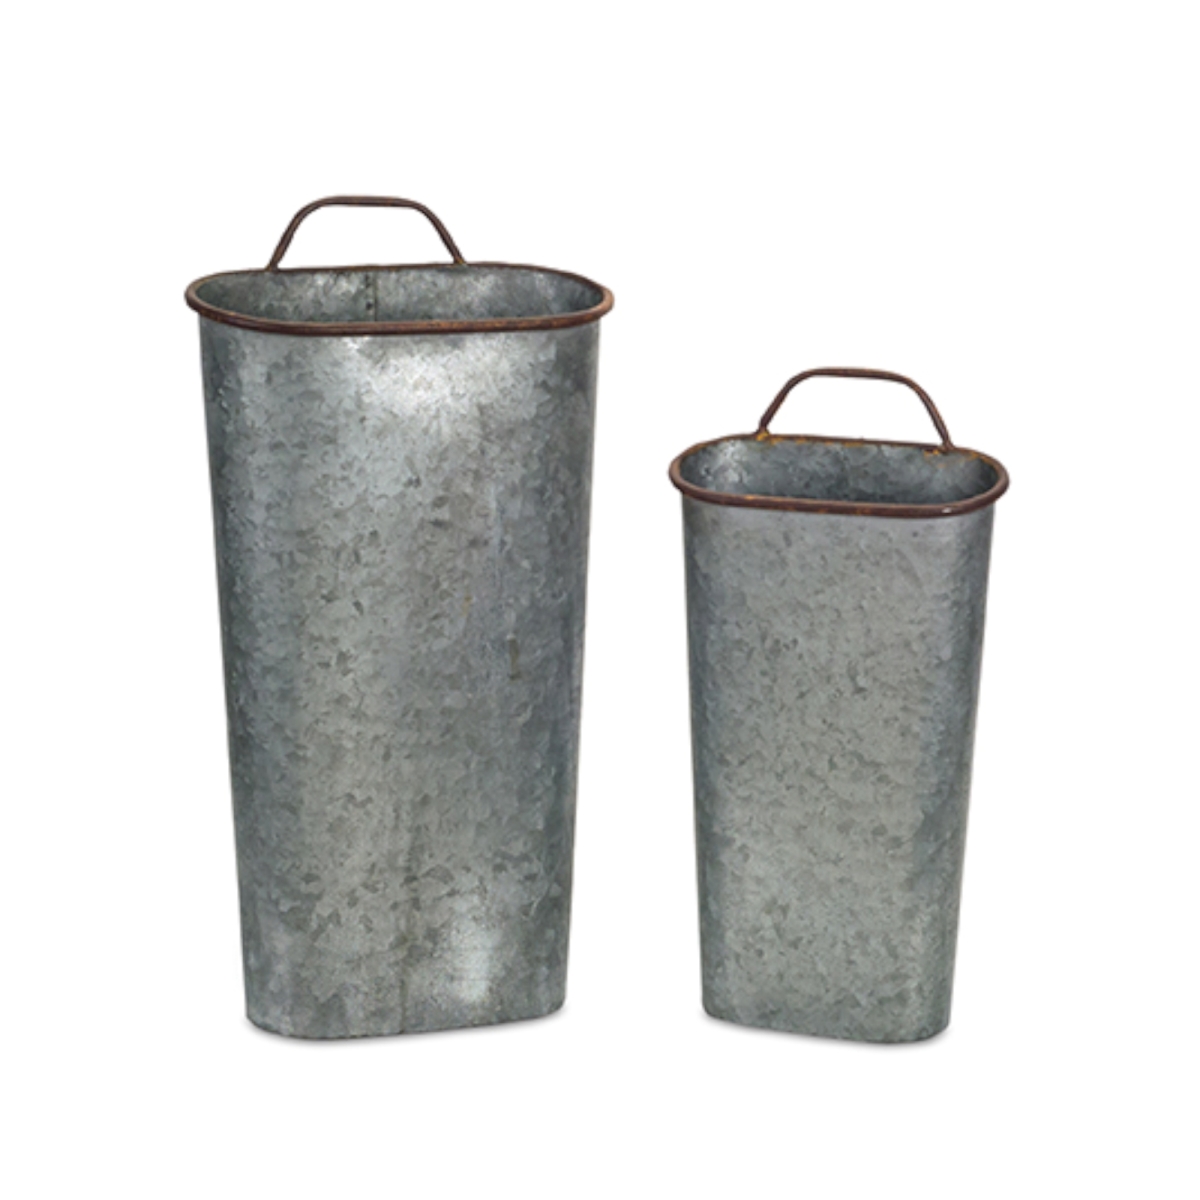 72736ds 17.25 X 8.25, 21 X 9 In. Metal Wall Bucket, Tin & Brown - Set Of 2